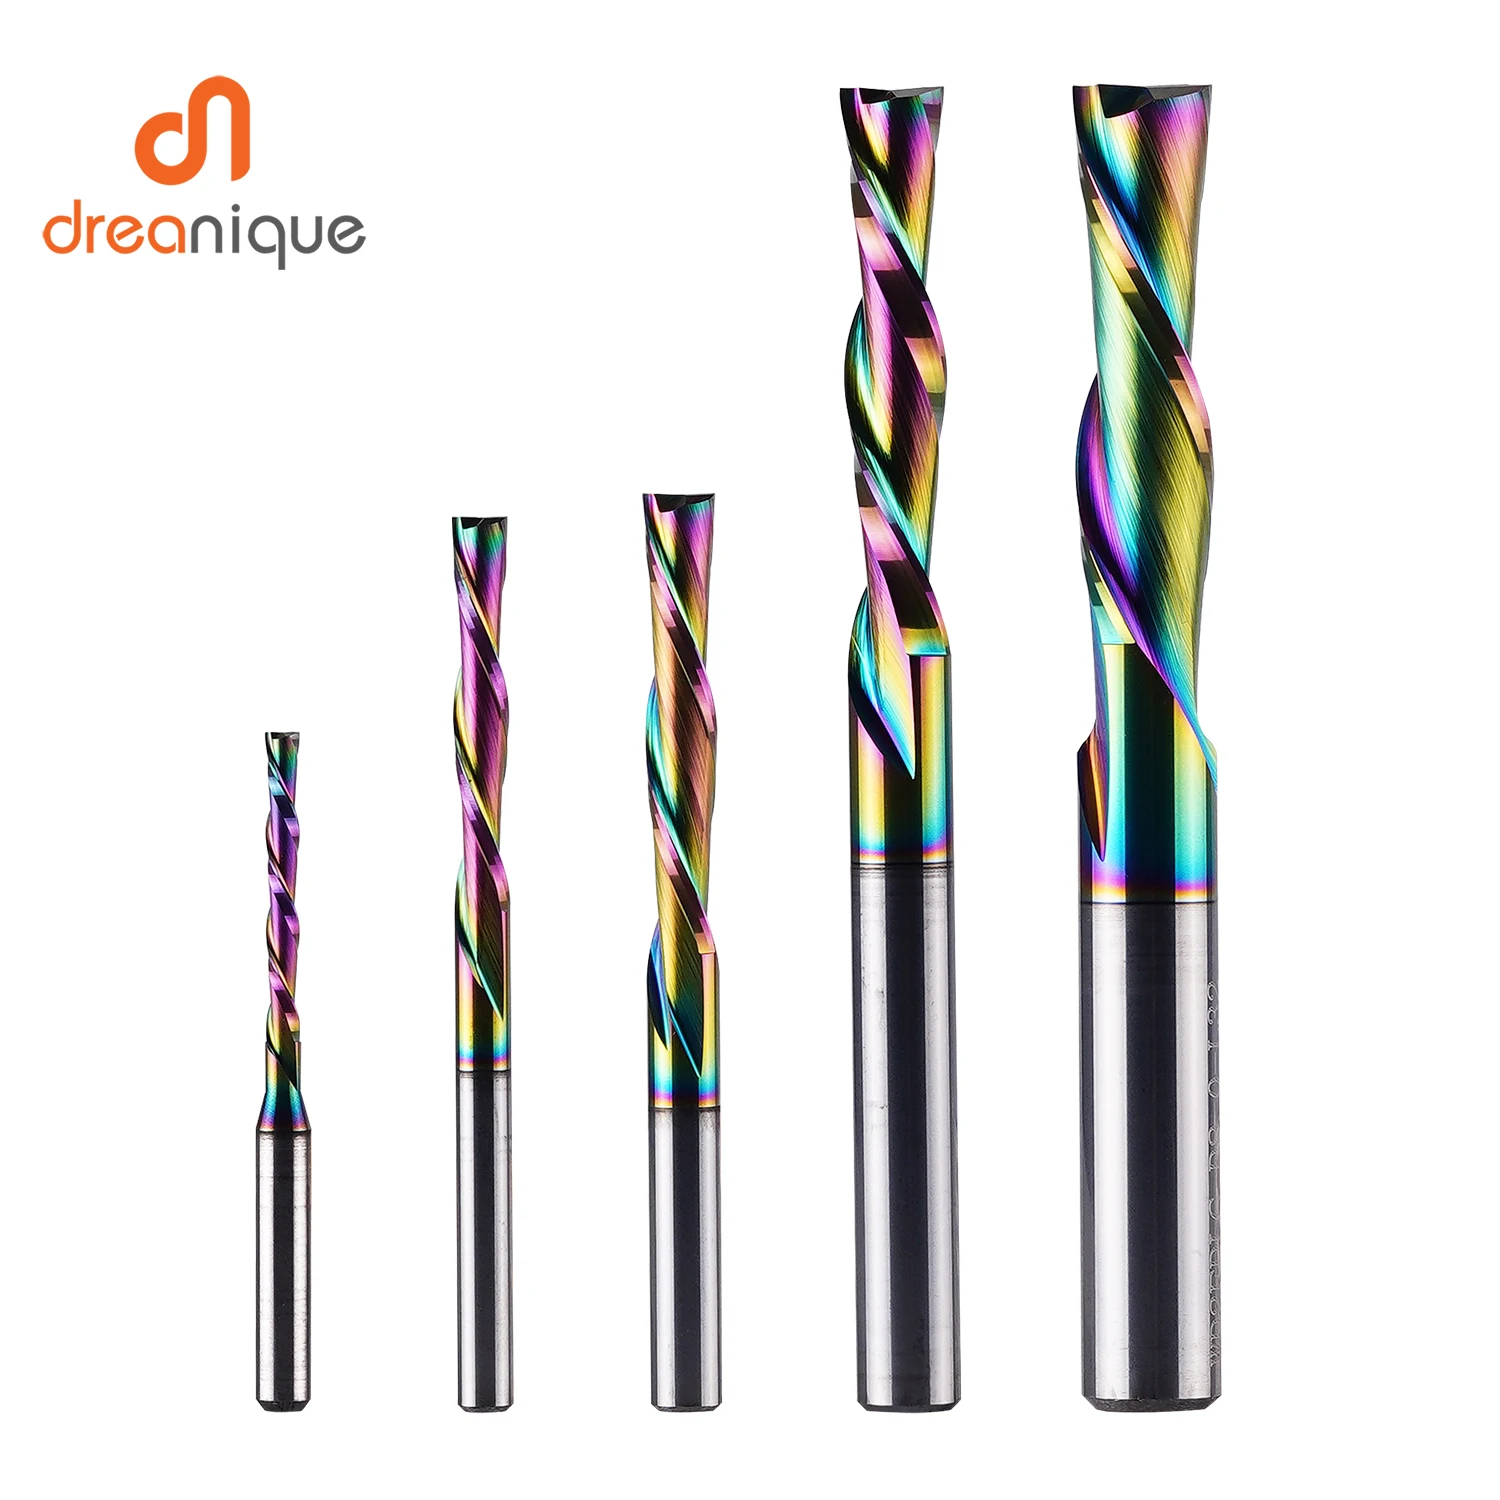 Dreanique 1pc DLC Coating Solid Carbide Milling Cutter 3.1,4,6,8, 10,6.35mm 2 Flute Spiral Router Bit End Mill Wood MDF Down Cut